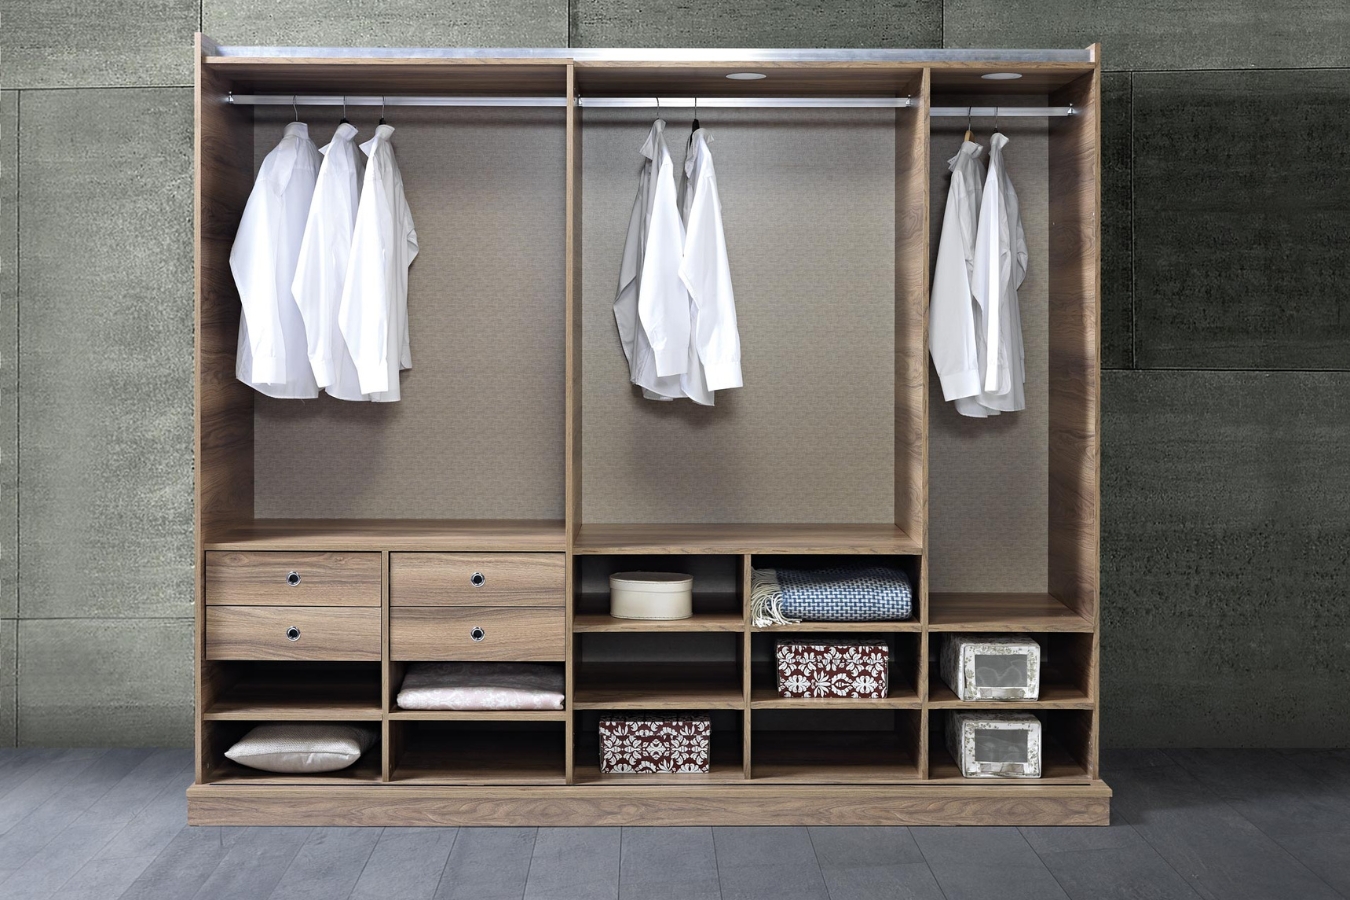 Top 5 Furnishings to Improve Storage in Your House